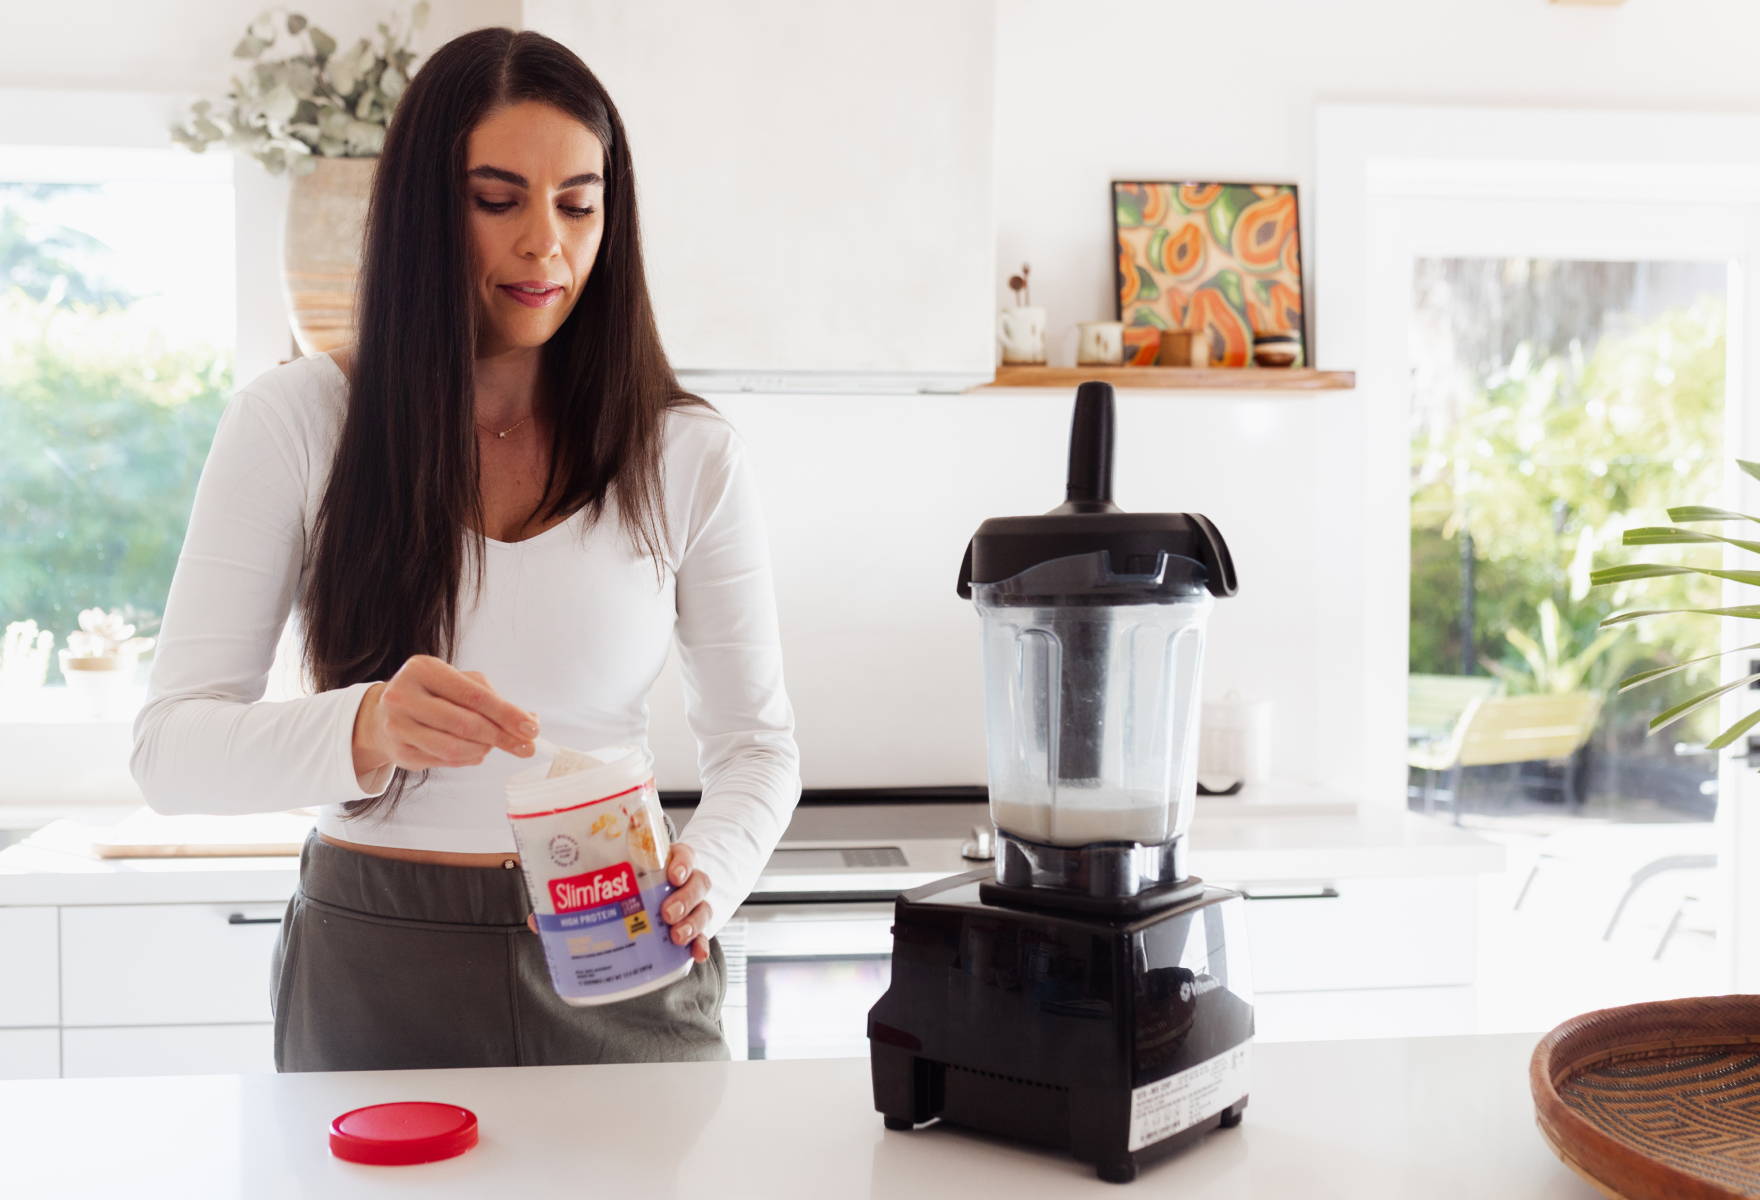 Lifestyle image of lady making a smoothie